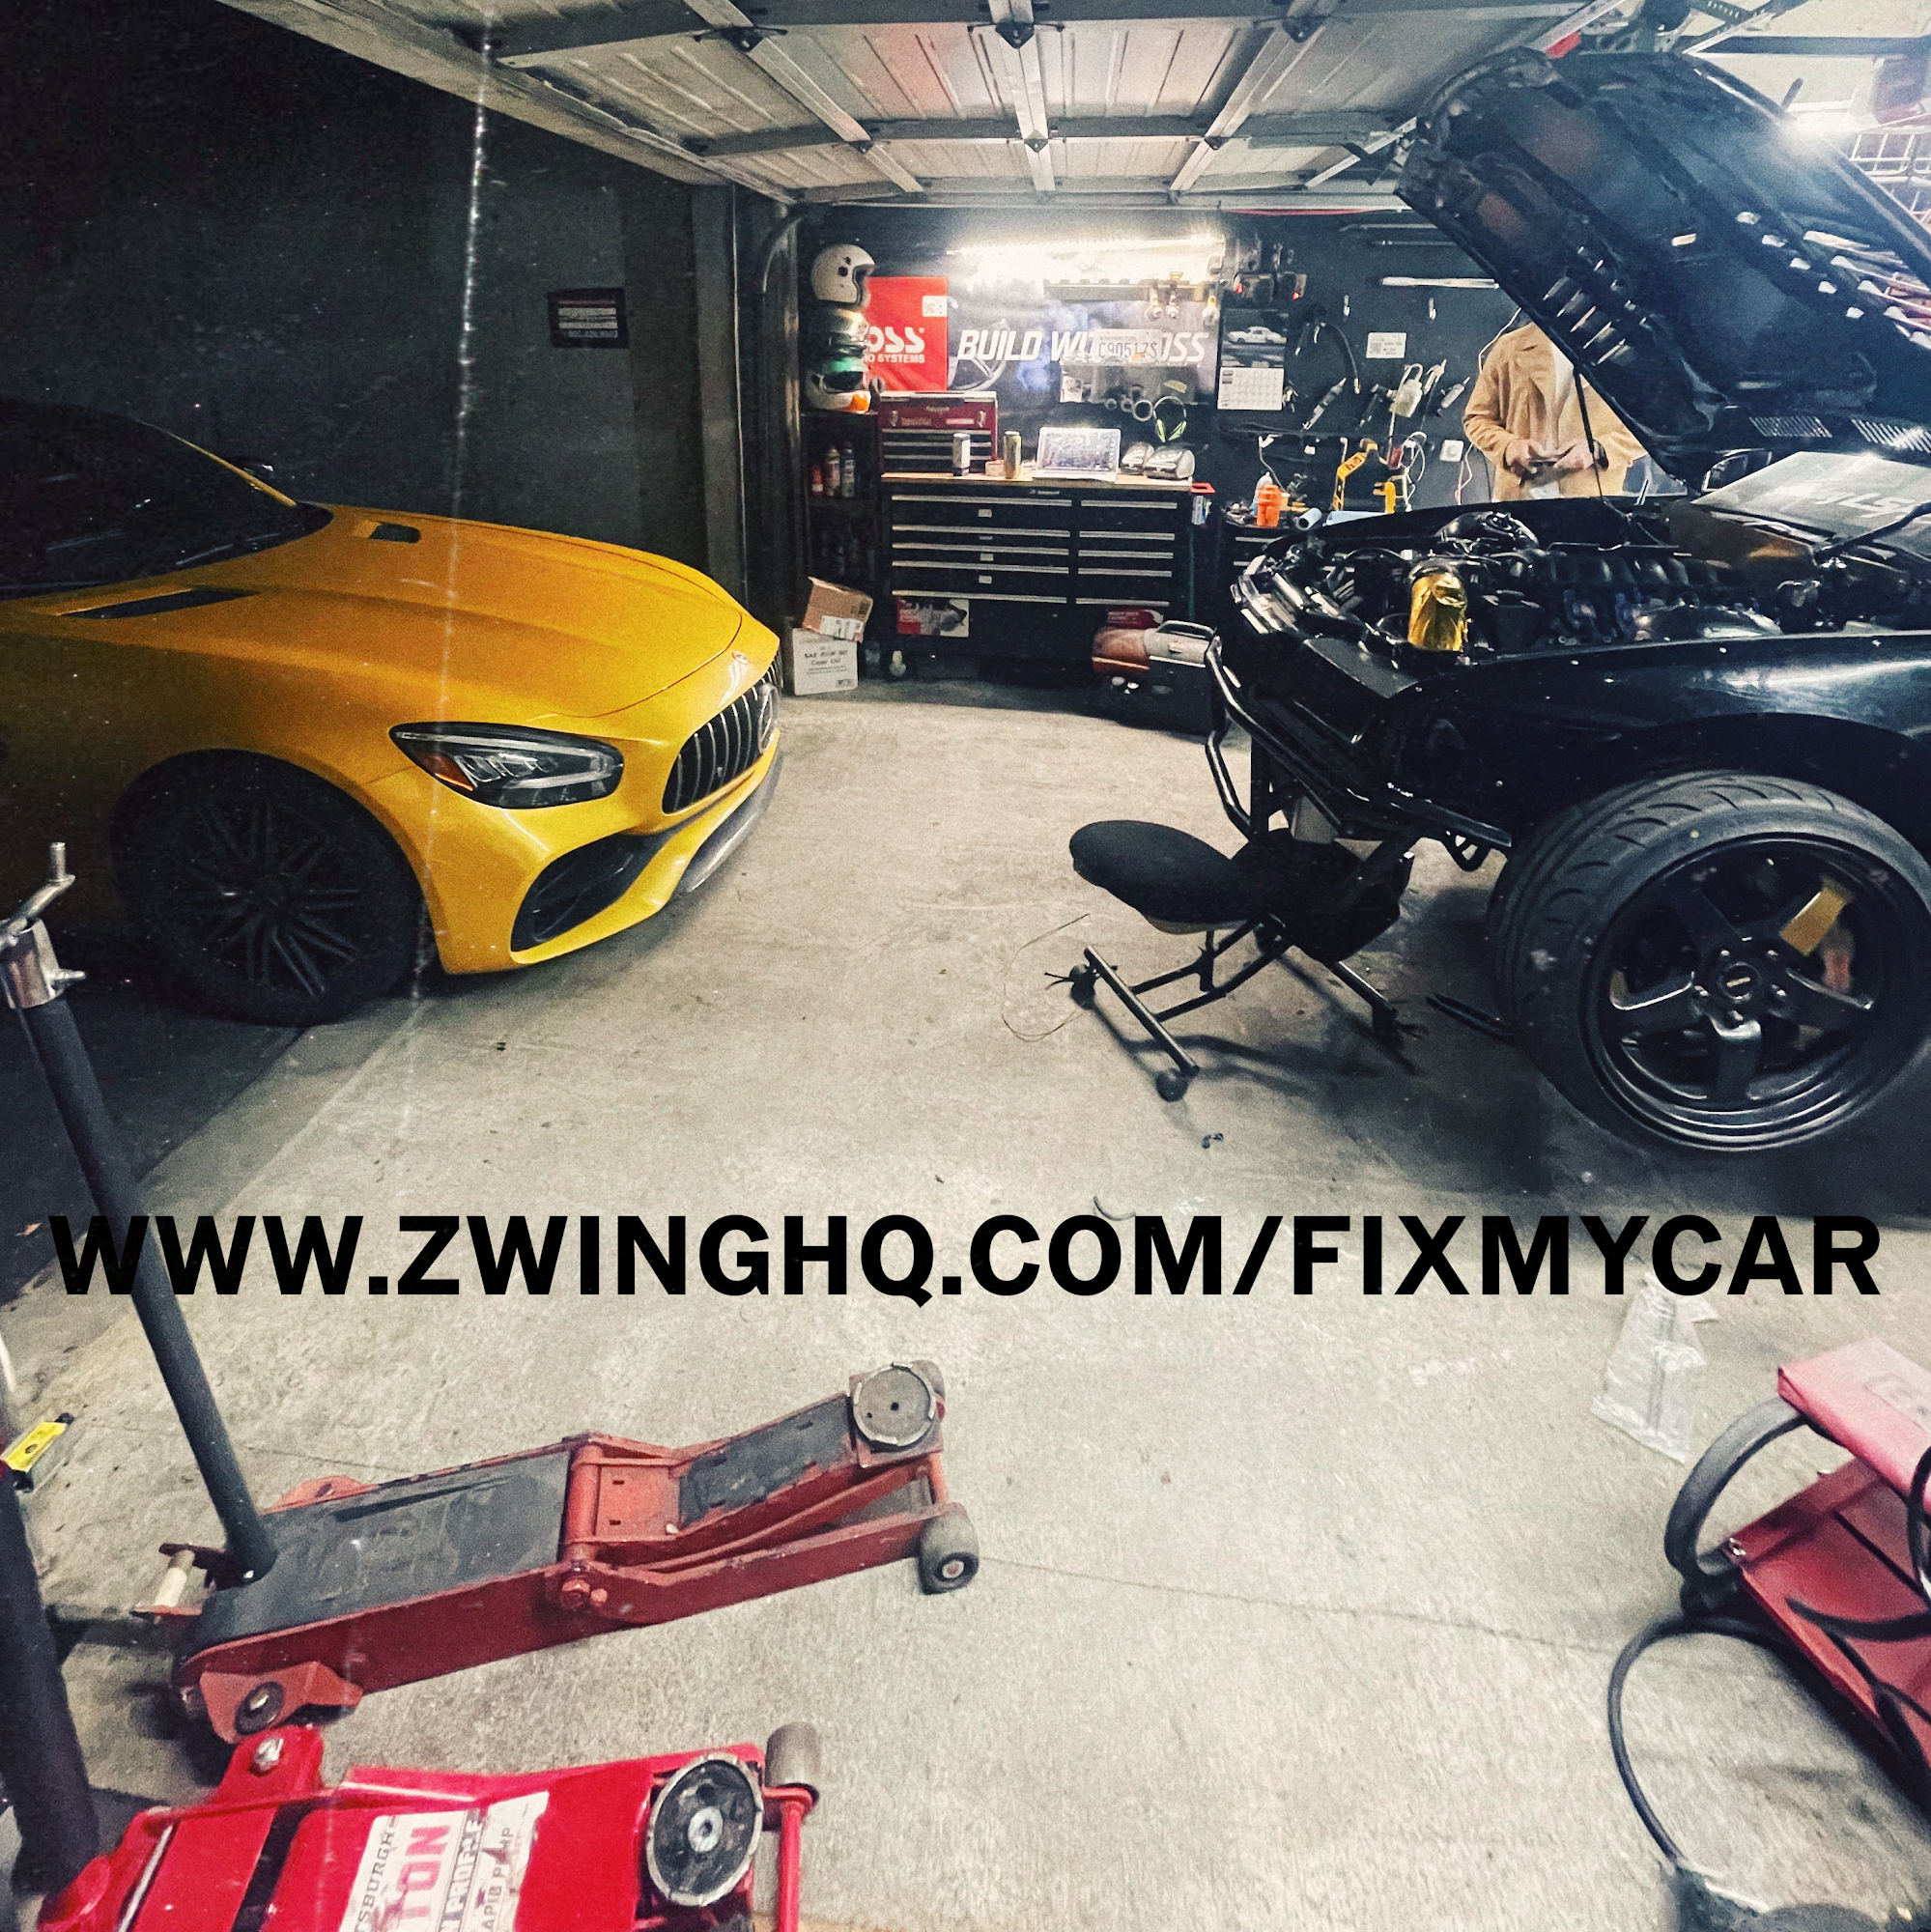 Zwing HQ Automotive Performance & Repair